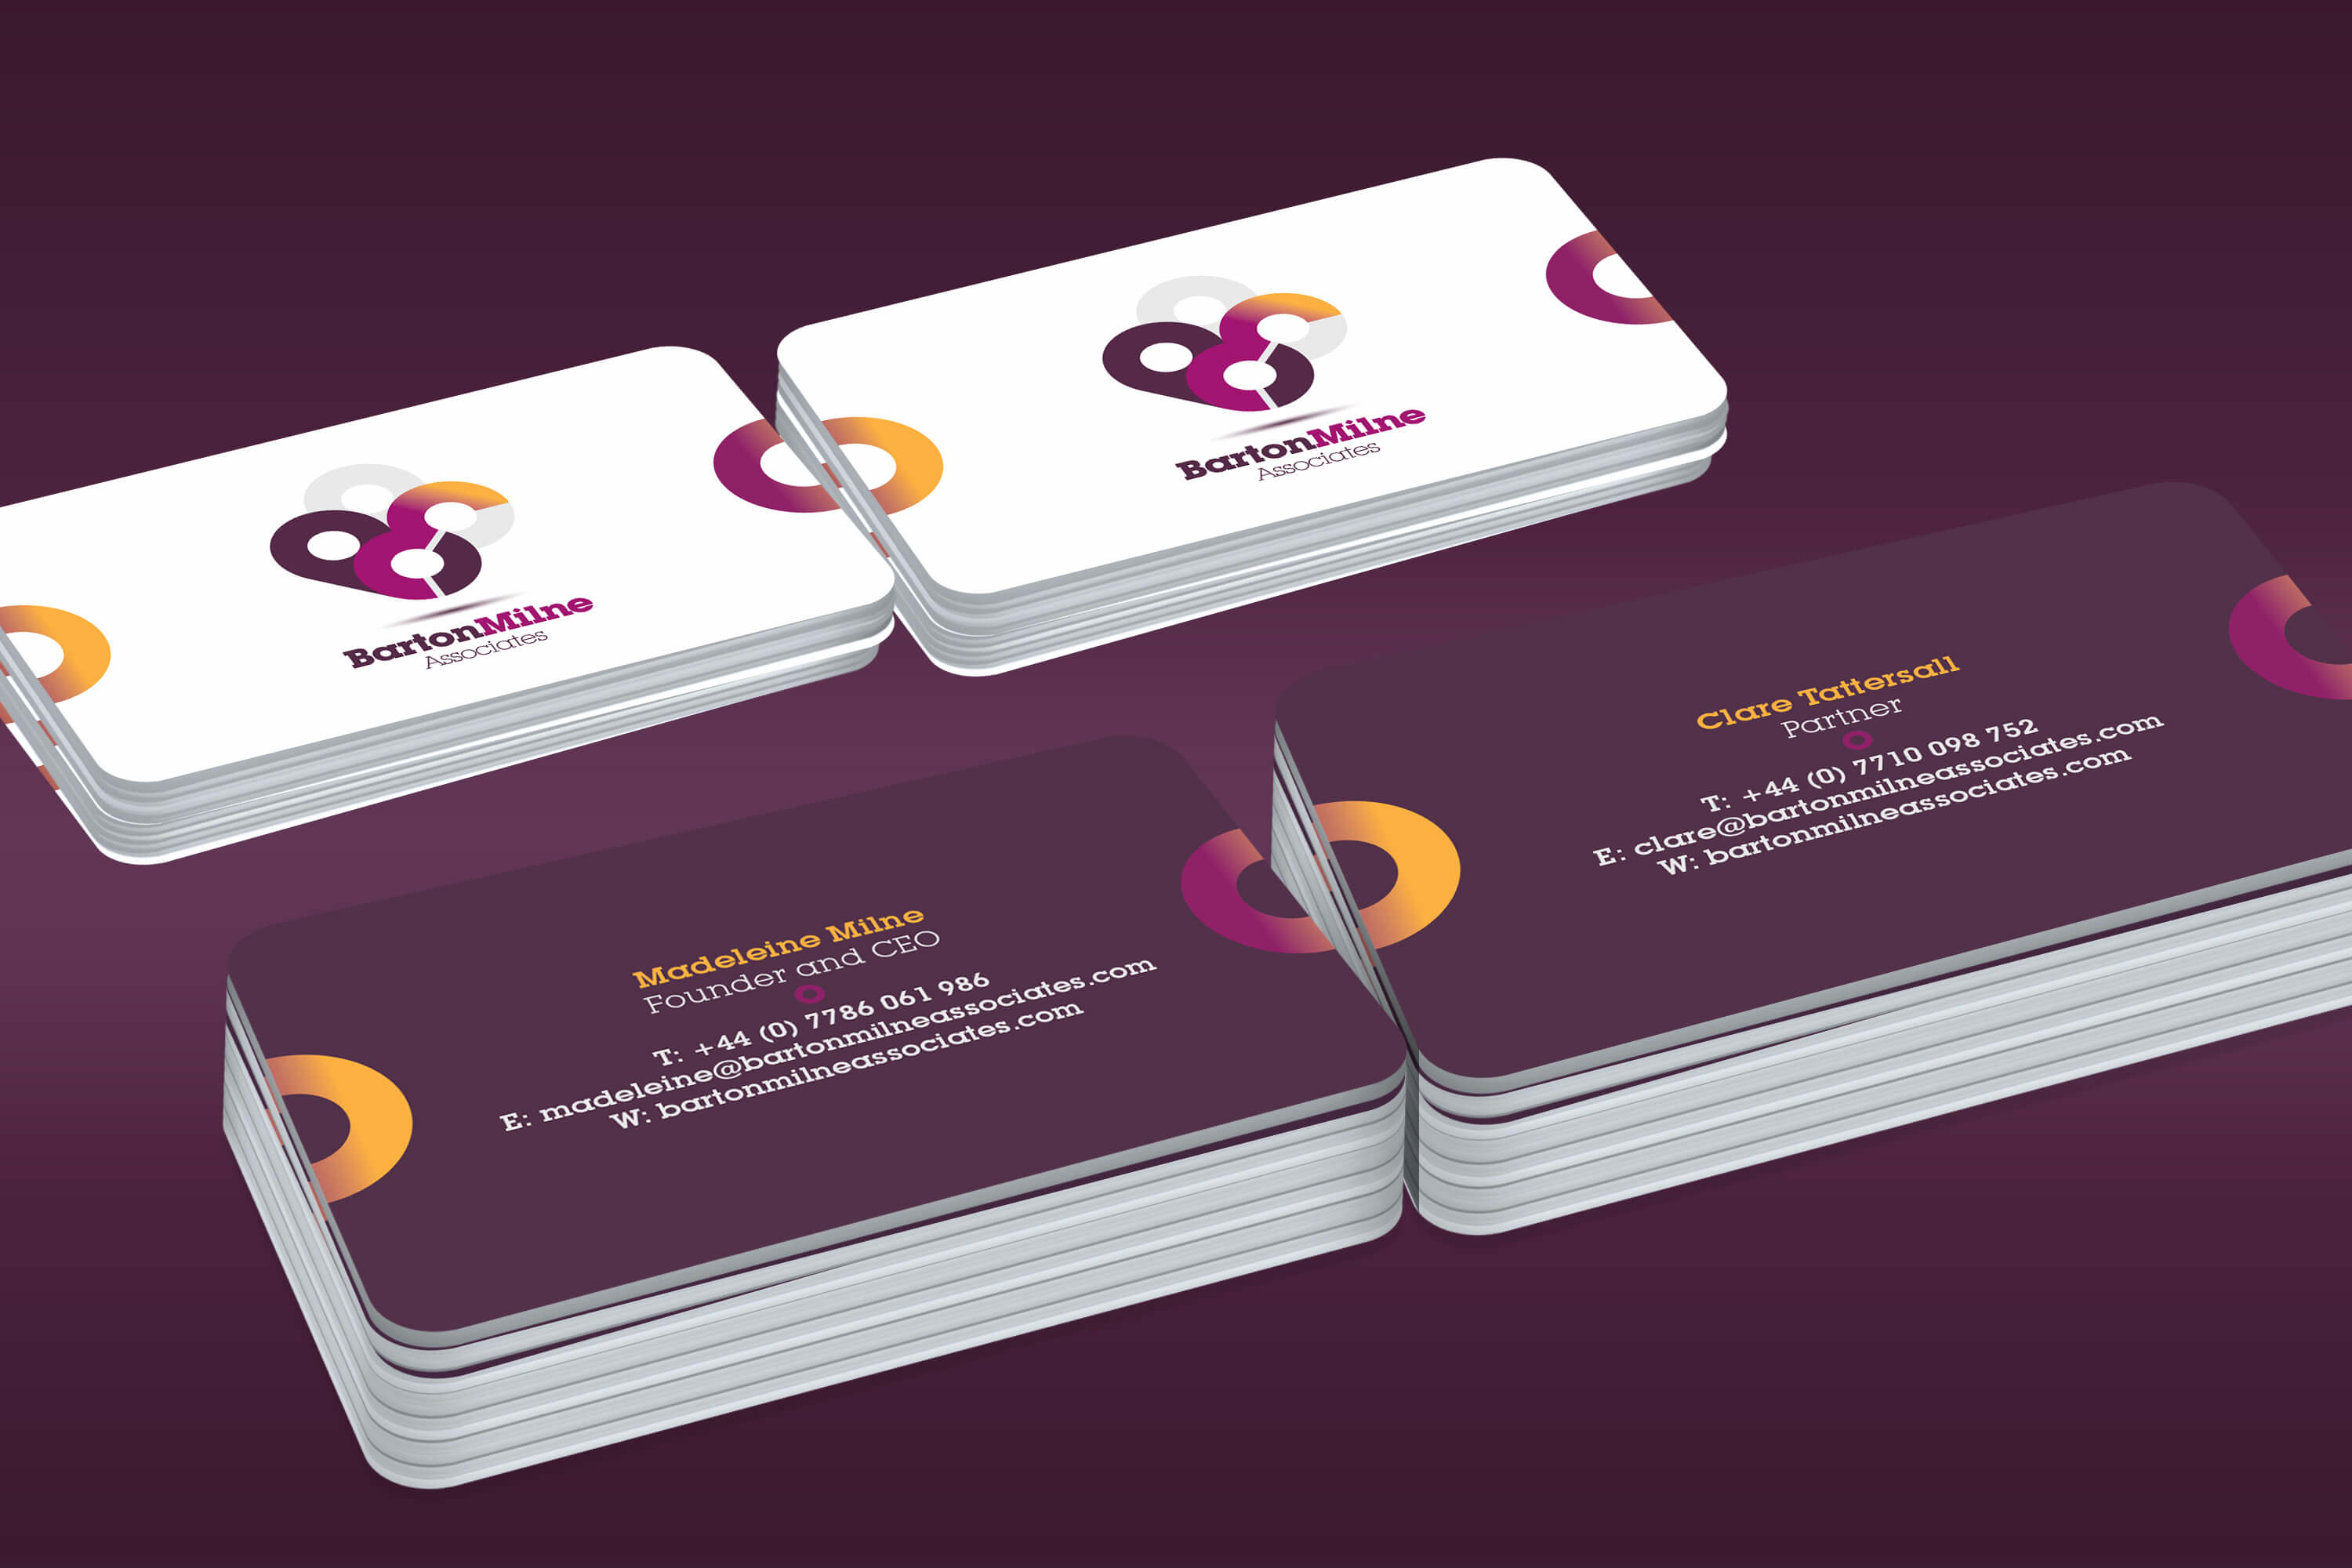 Front and back of the Barton Milne Associates business card